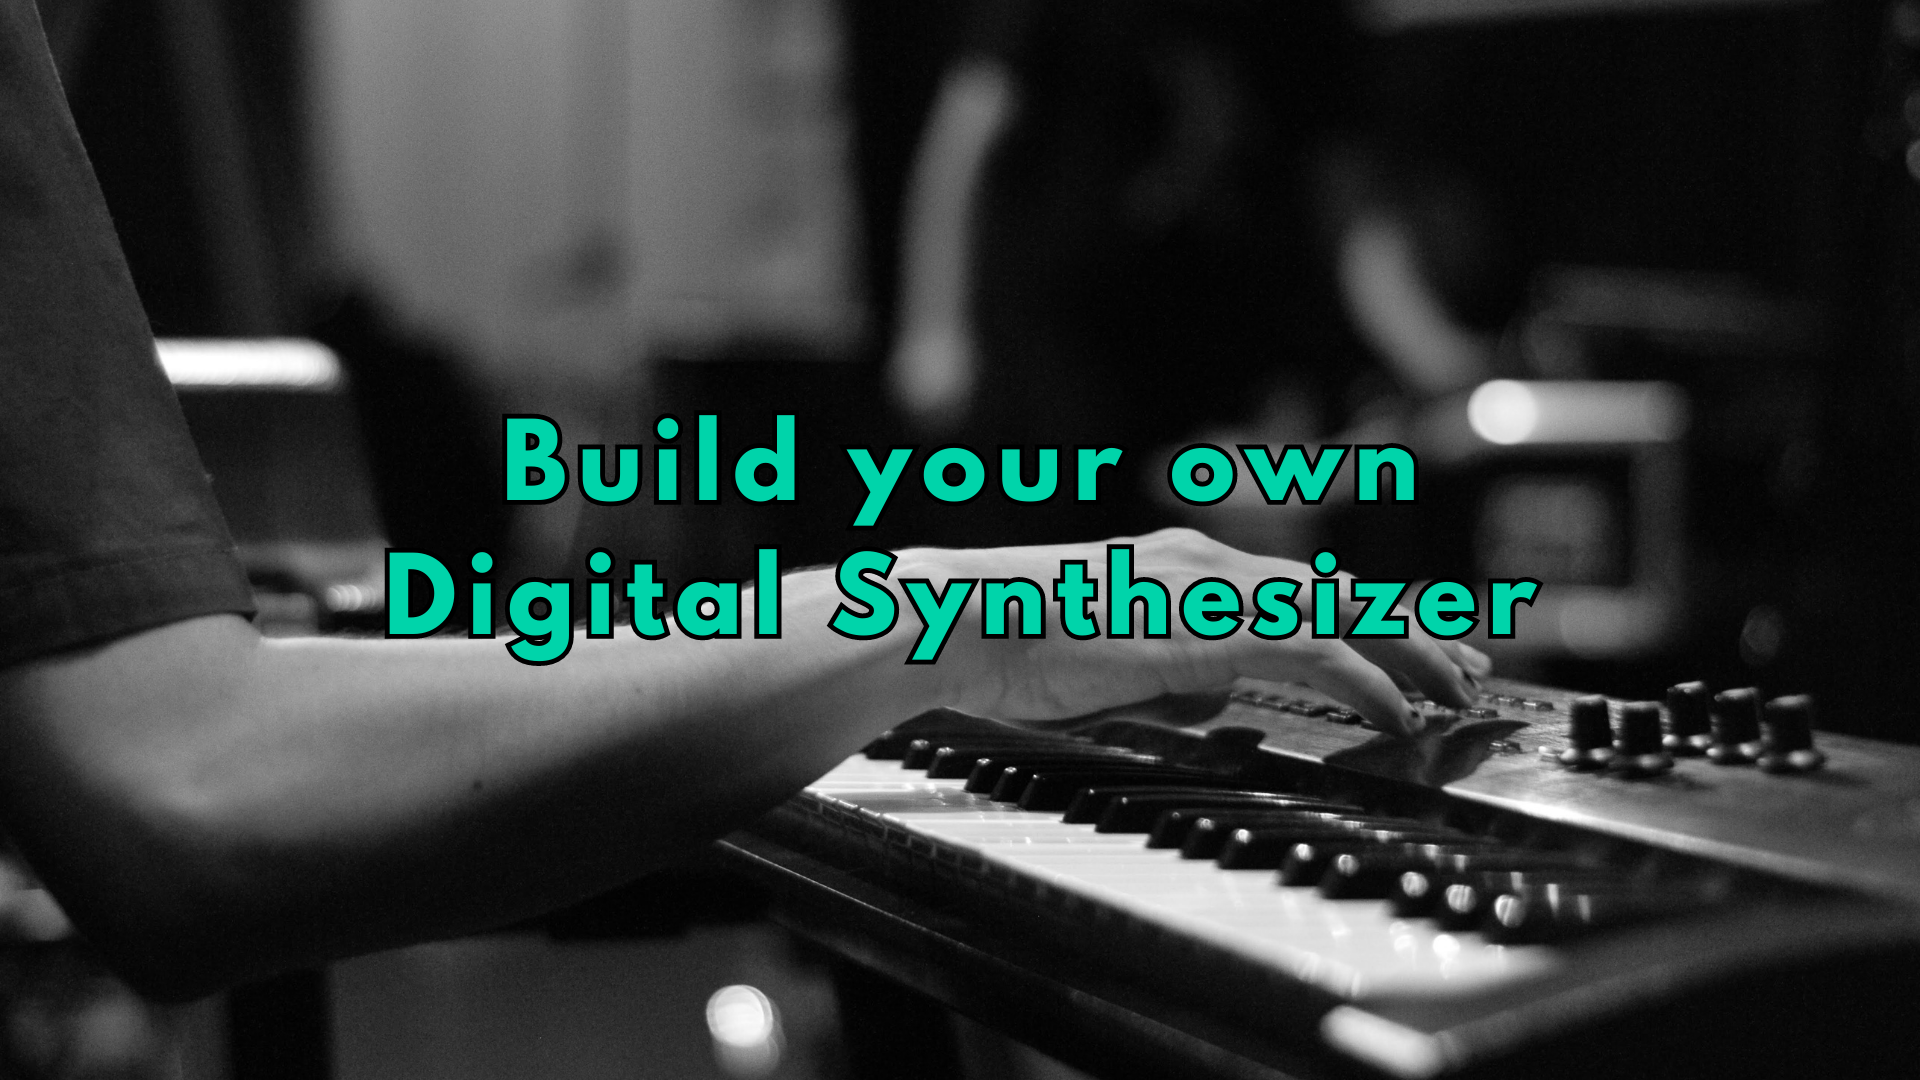 Build your own Digital Synthesizer